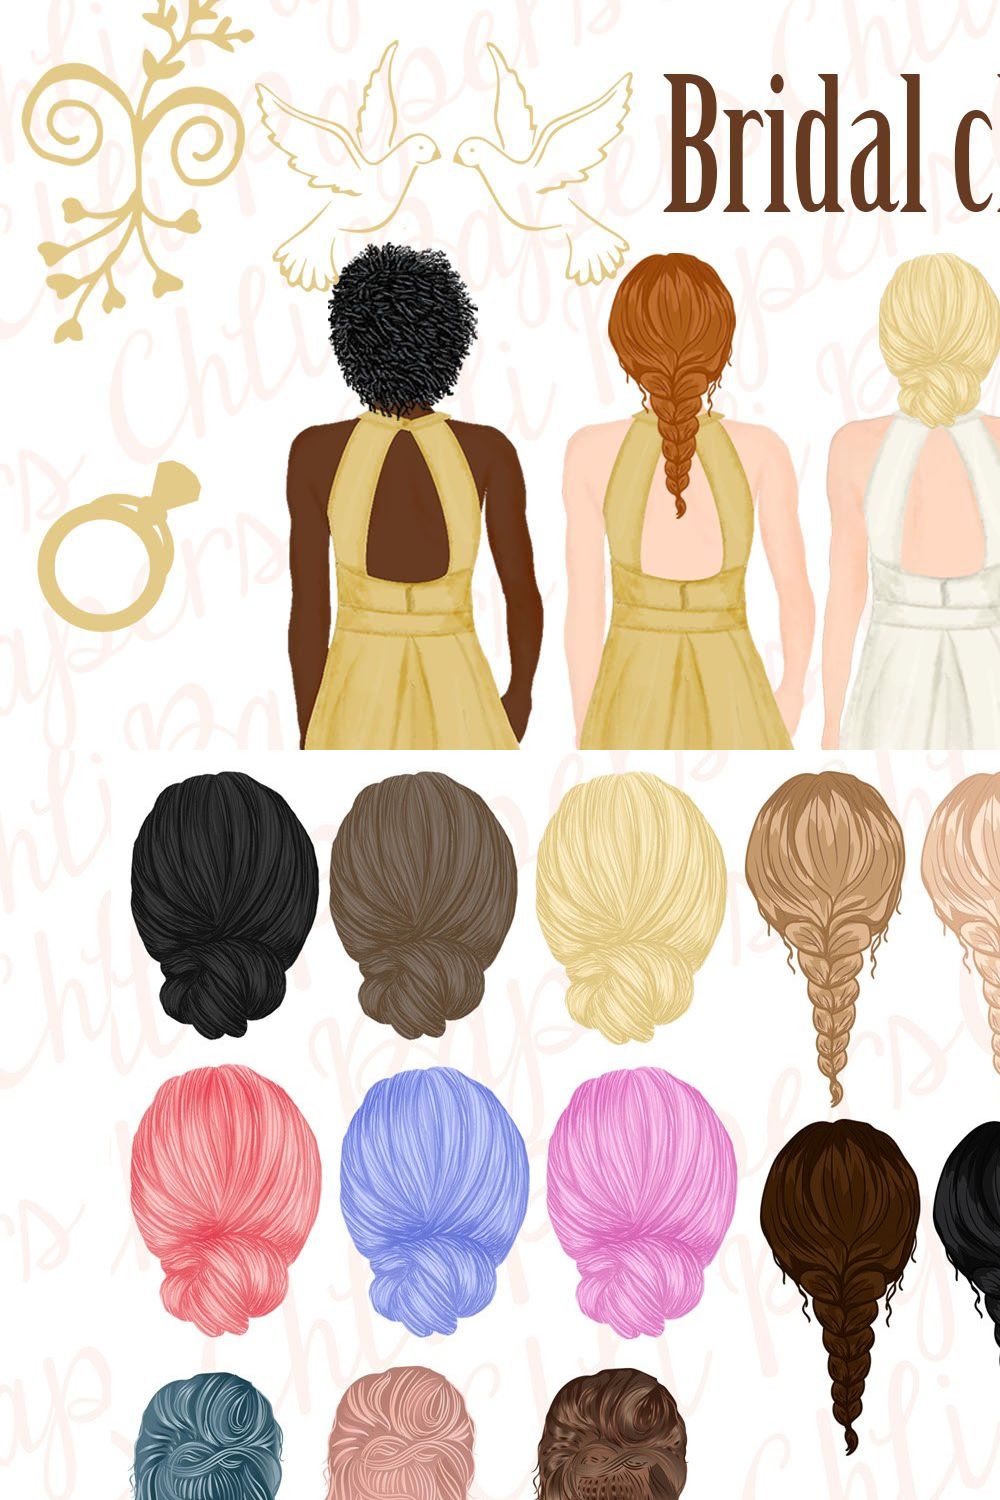 Bride and Bridesmaids clipart pinterest preview image.